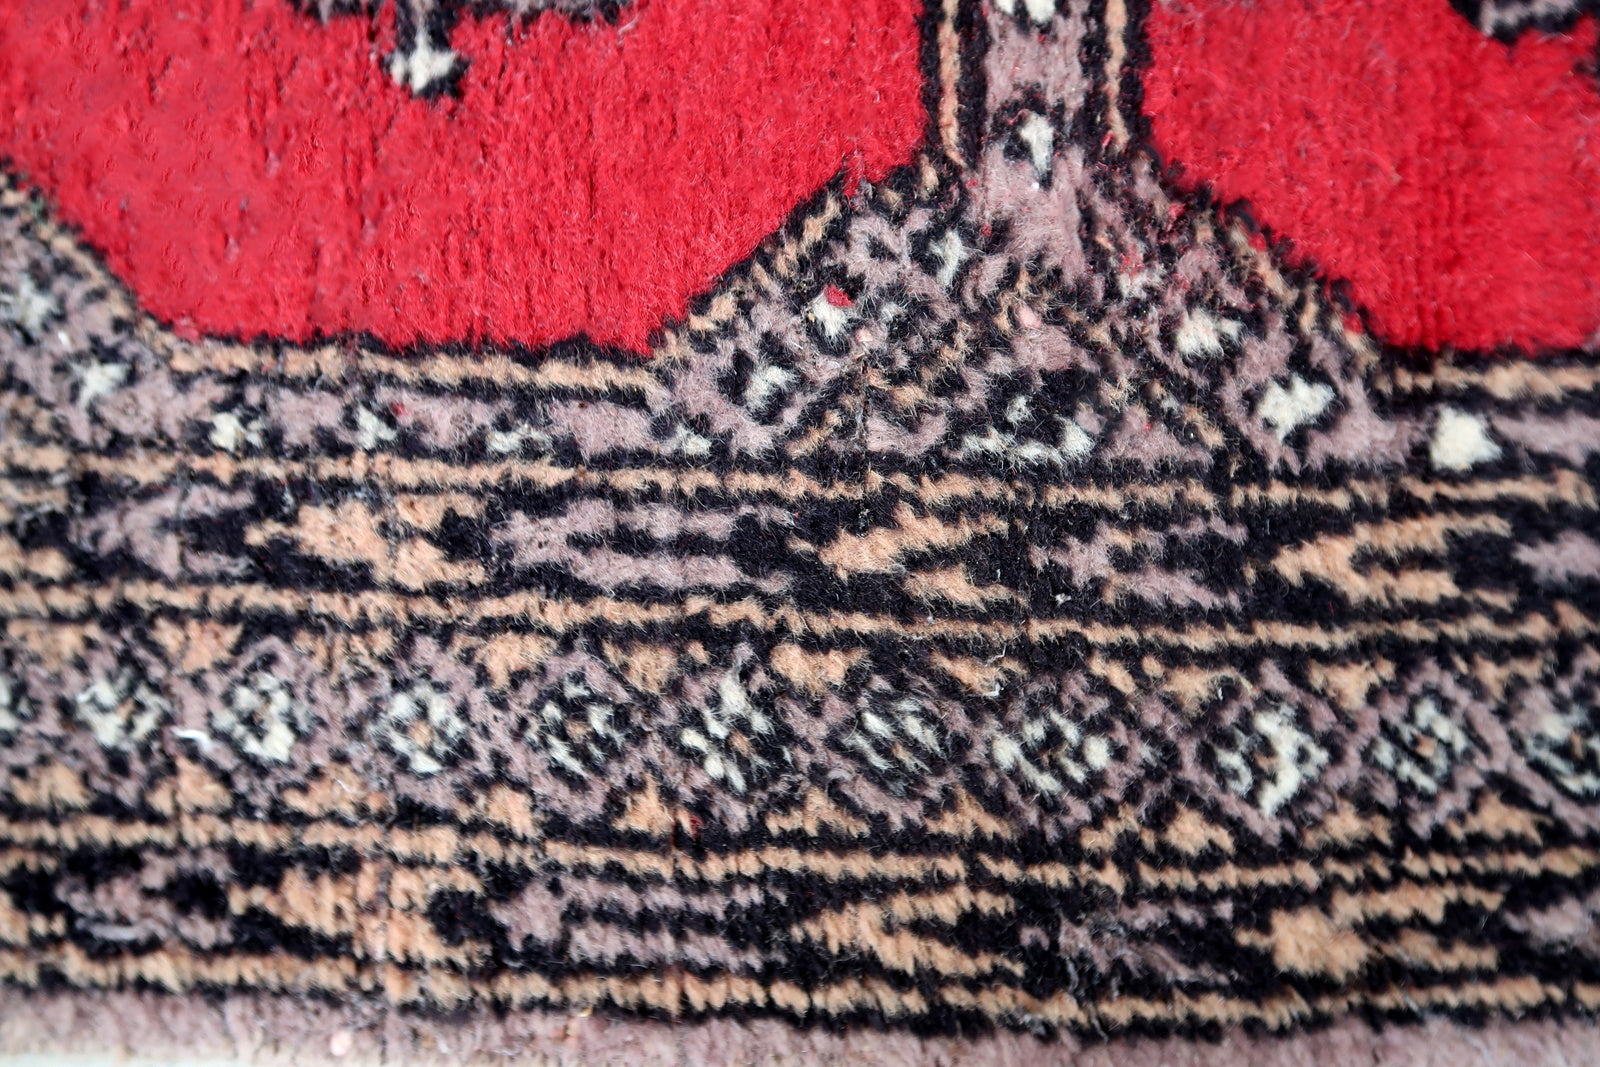 Handmade vintage Uzbek Bukhara rug in traditional design. The rug is from the end of 20th century, it is in original condition, has some signs of age.